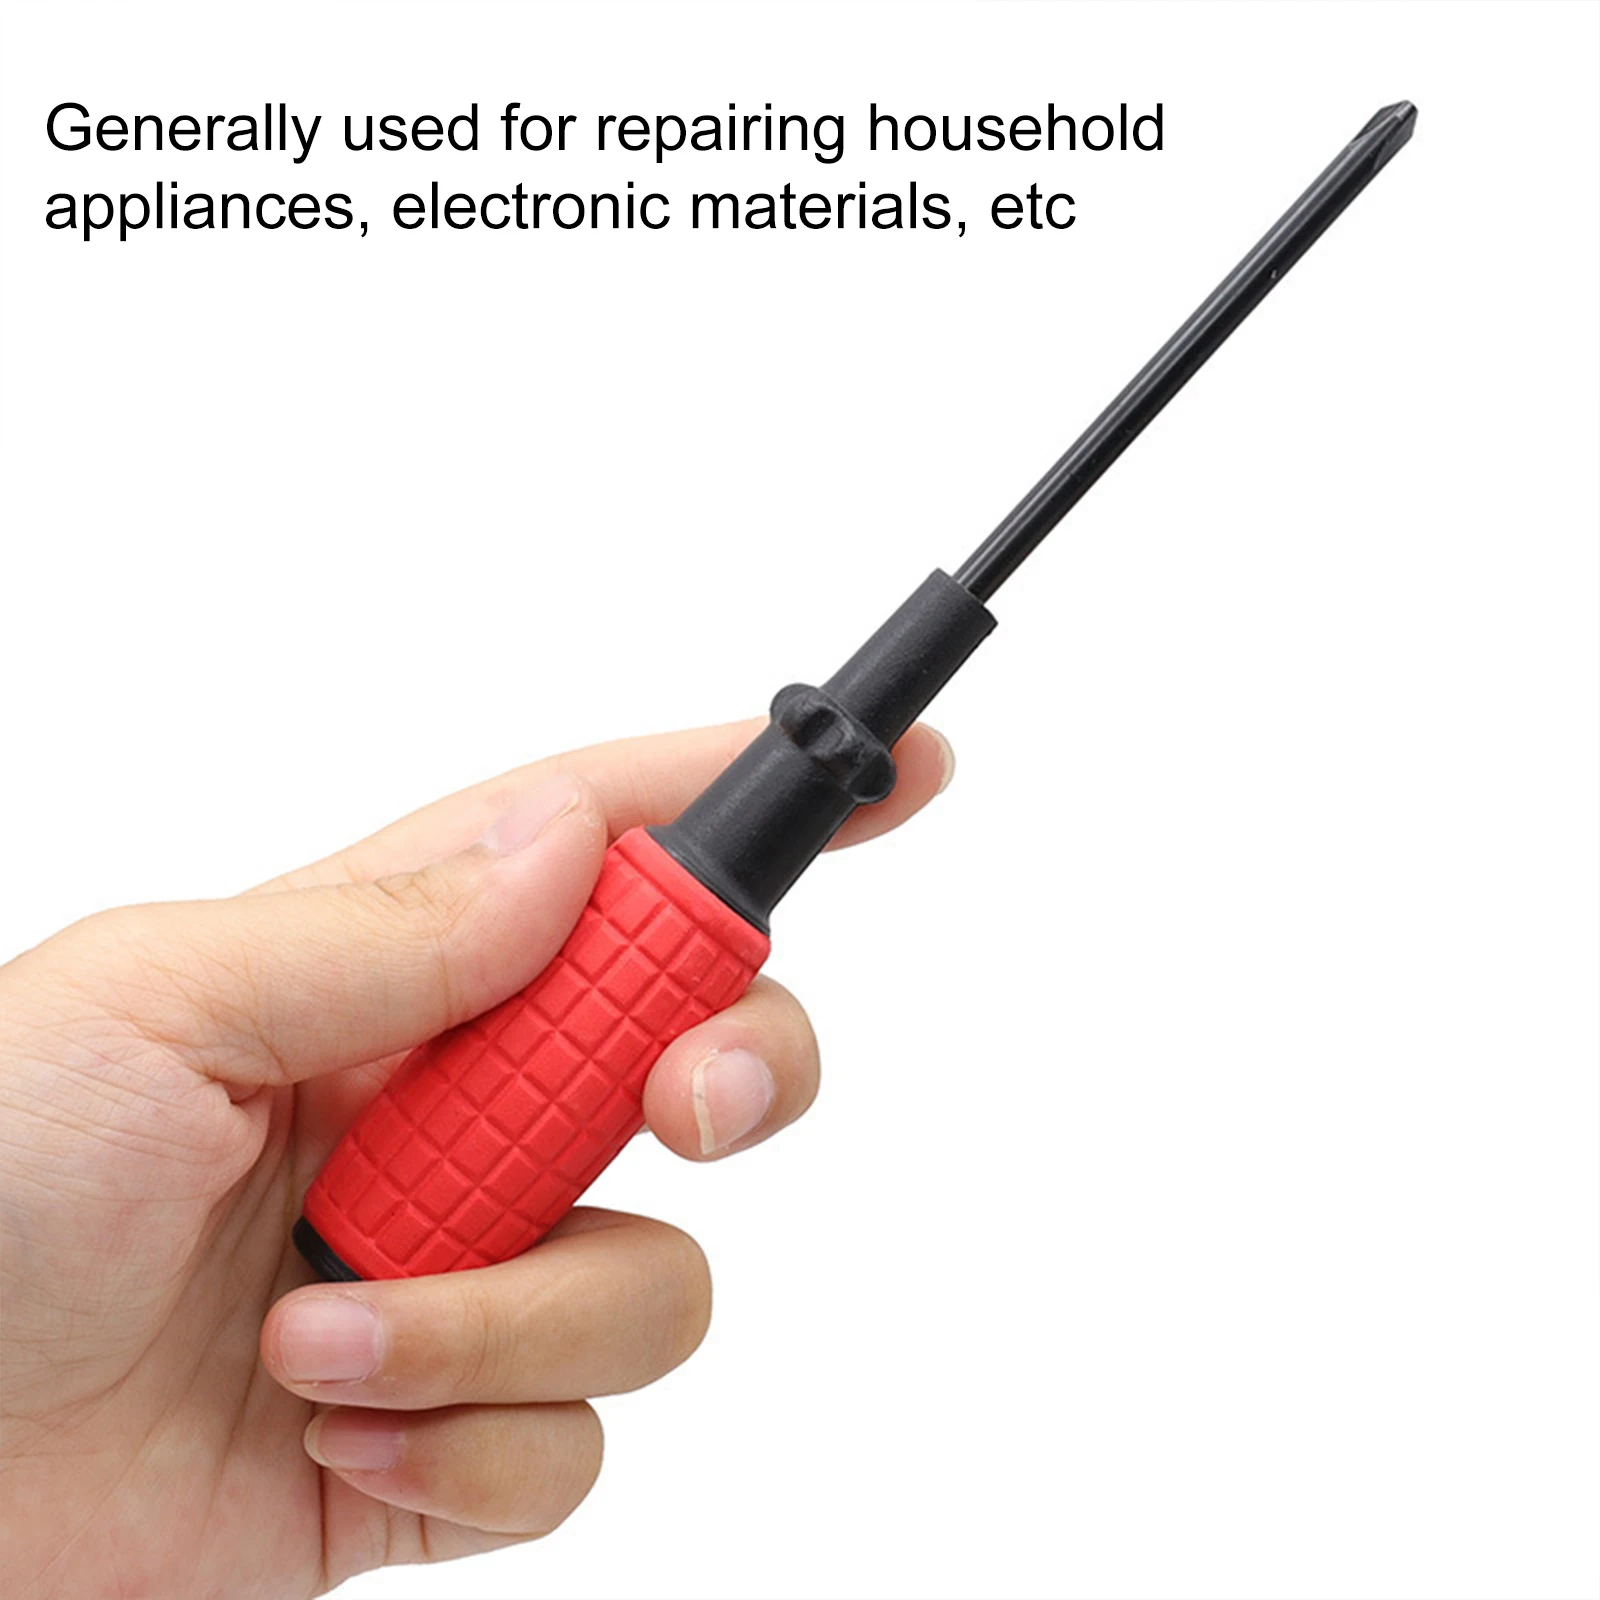 1PC Magnetic Screwdriver Multifunctional Flat Head Cross Screwdriver Household Basic Anti Slip Manual Screw Drive Tool ratchet magnetic dual use screwdriver set cross and straight double headed manual industrial grade screwdriver screwdriver screw